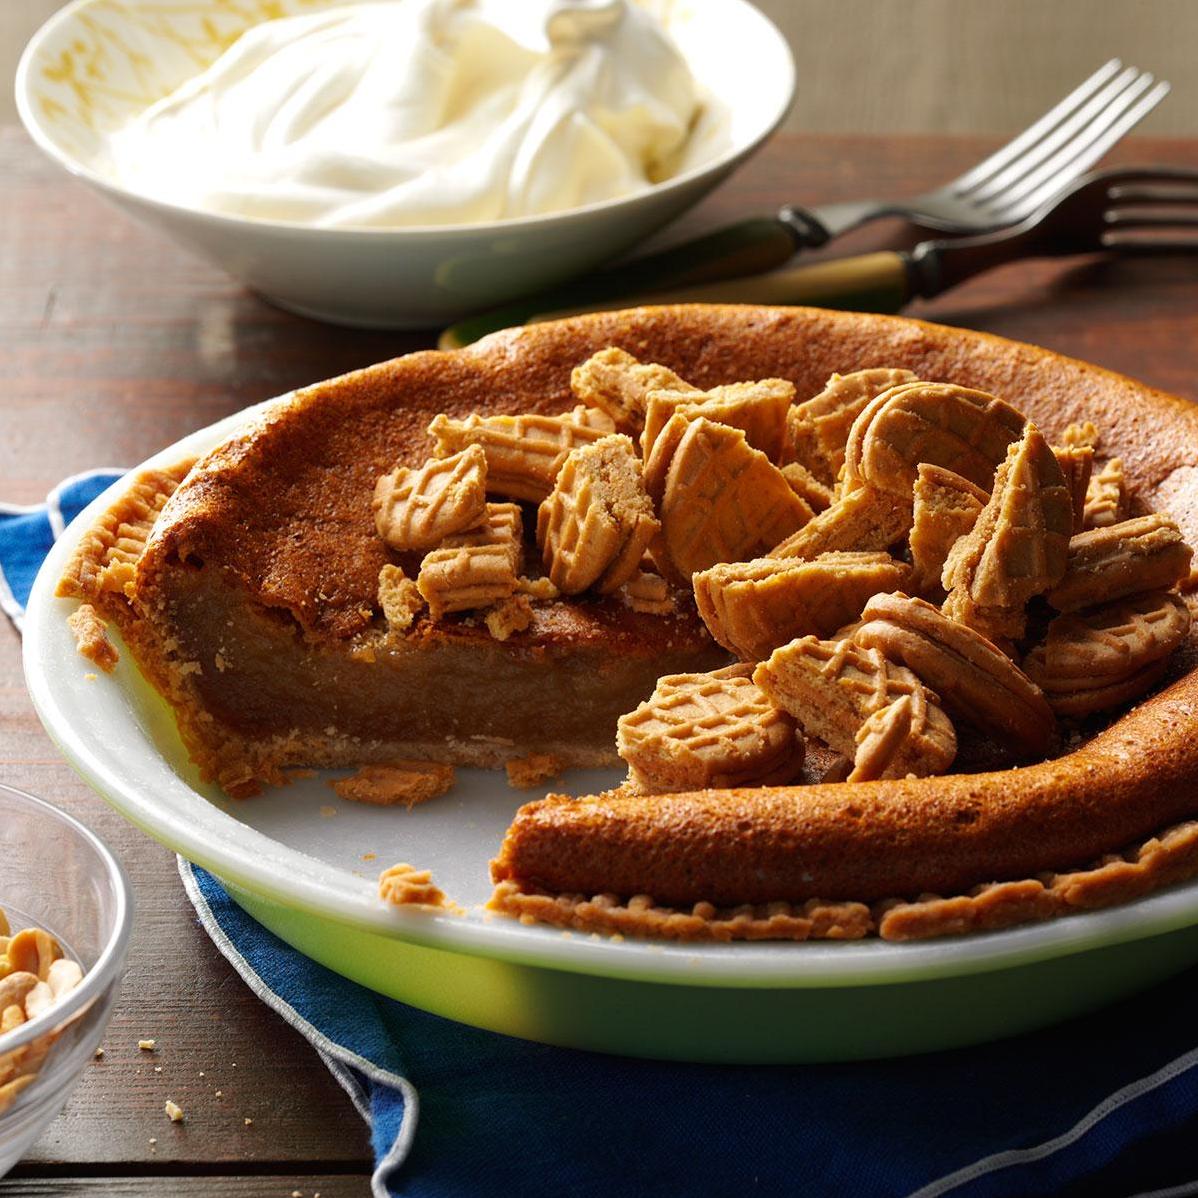 Indulge in the Luxurious Peanut Butter Pecan Pie